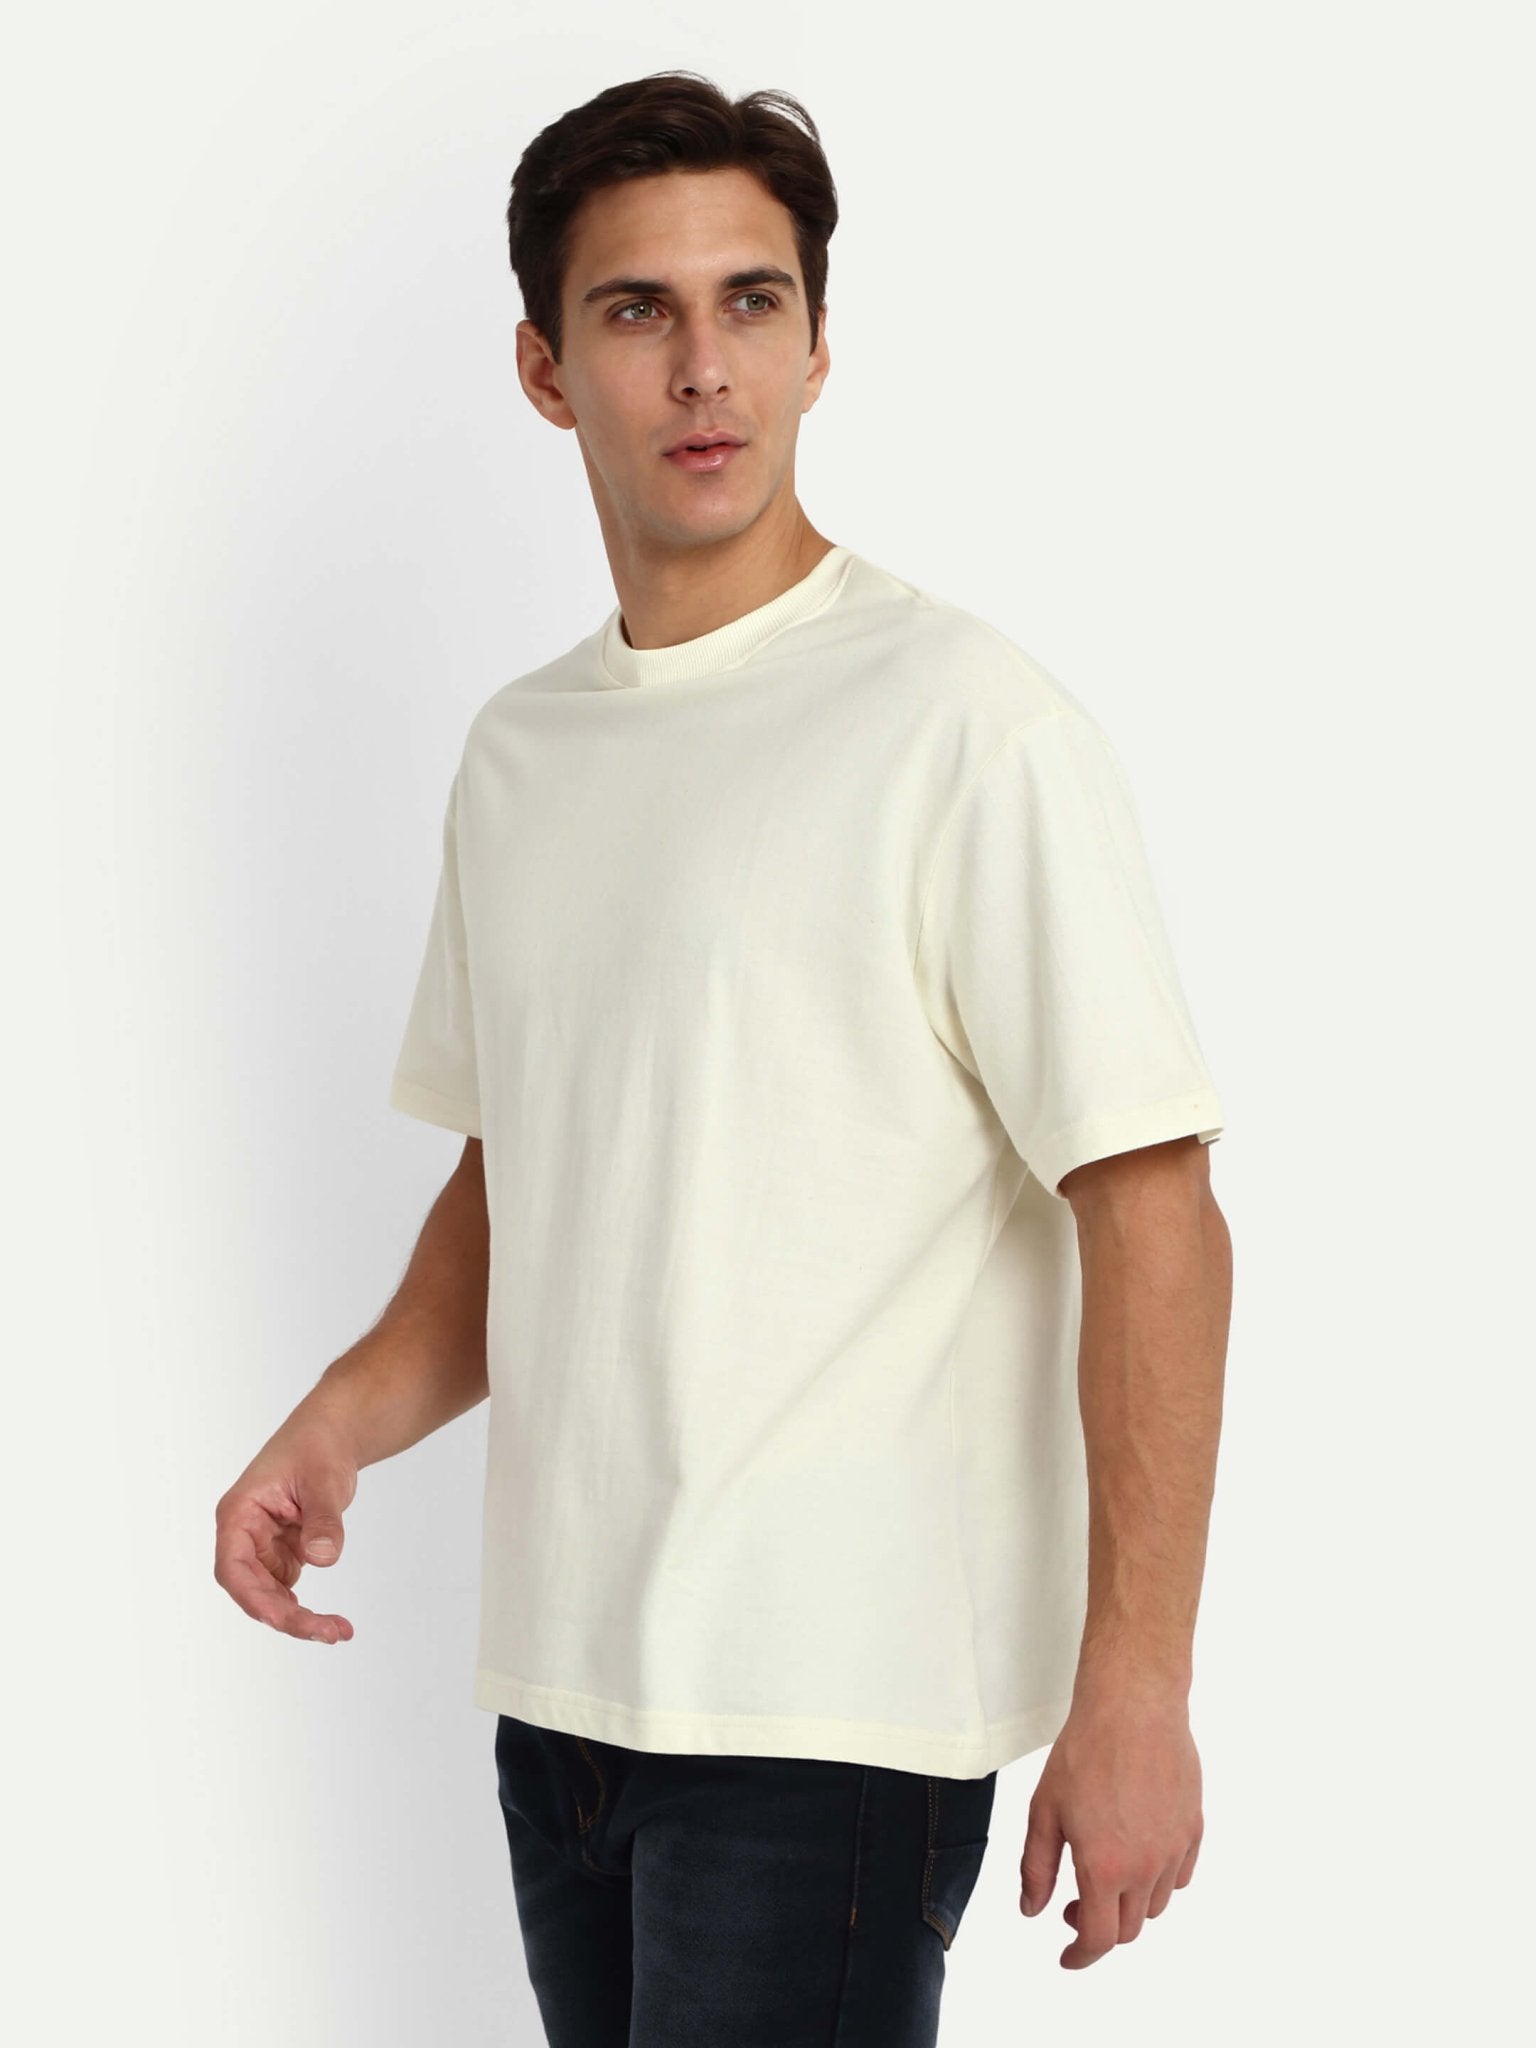 Relaxed Basic T-Shirt - 220 GSM - Antique White